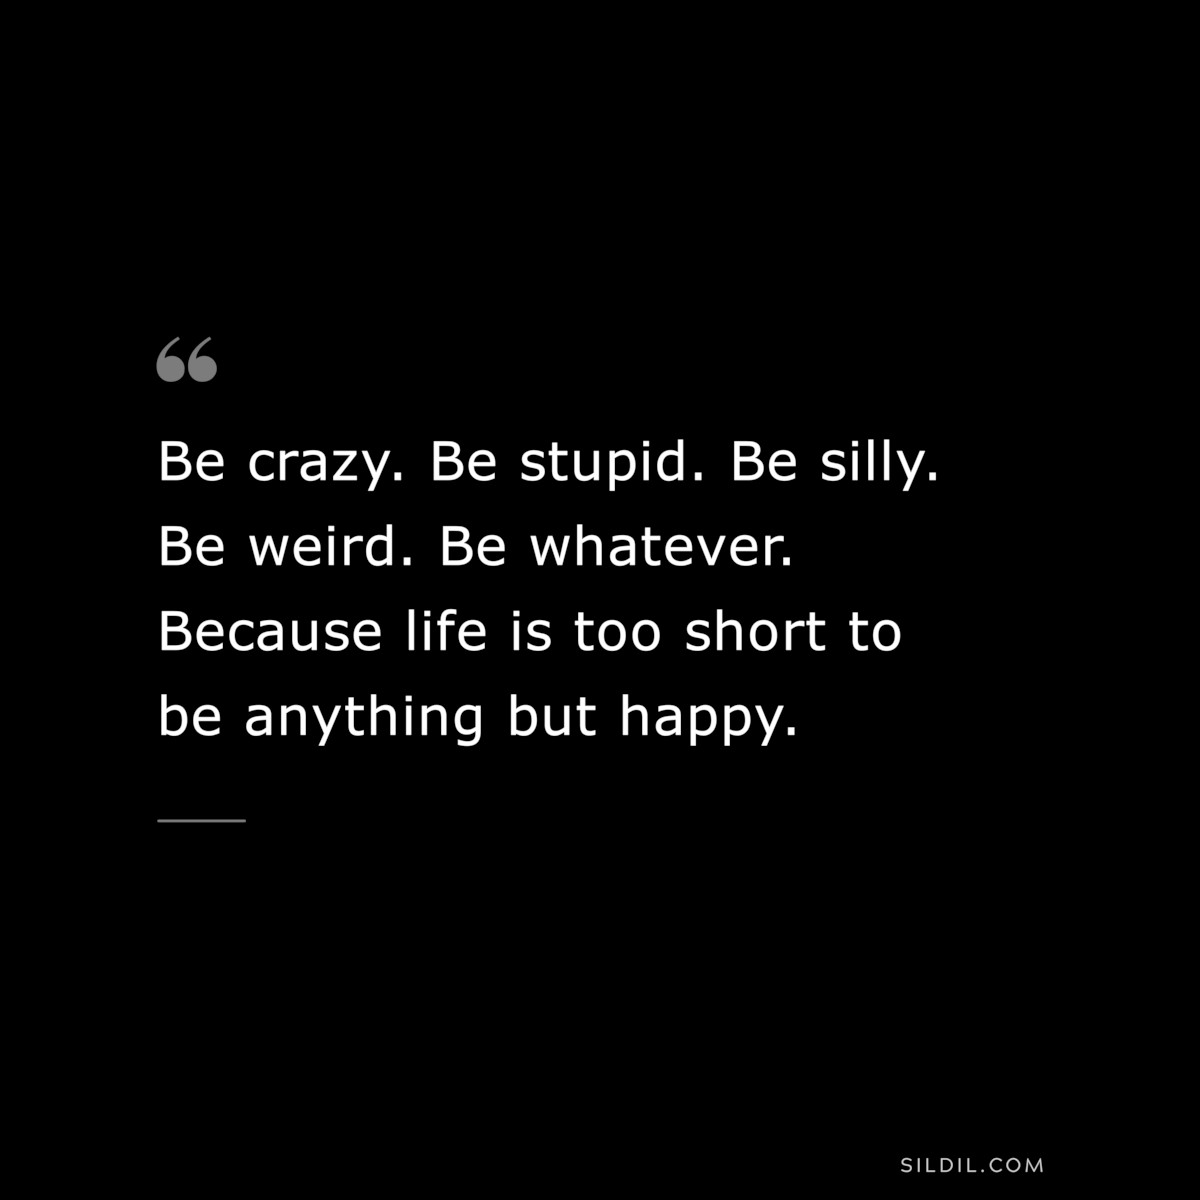 Be crazy. Be stupid. Be silly. Be weird. Be whatever. Because life is too short to be anything but happy.